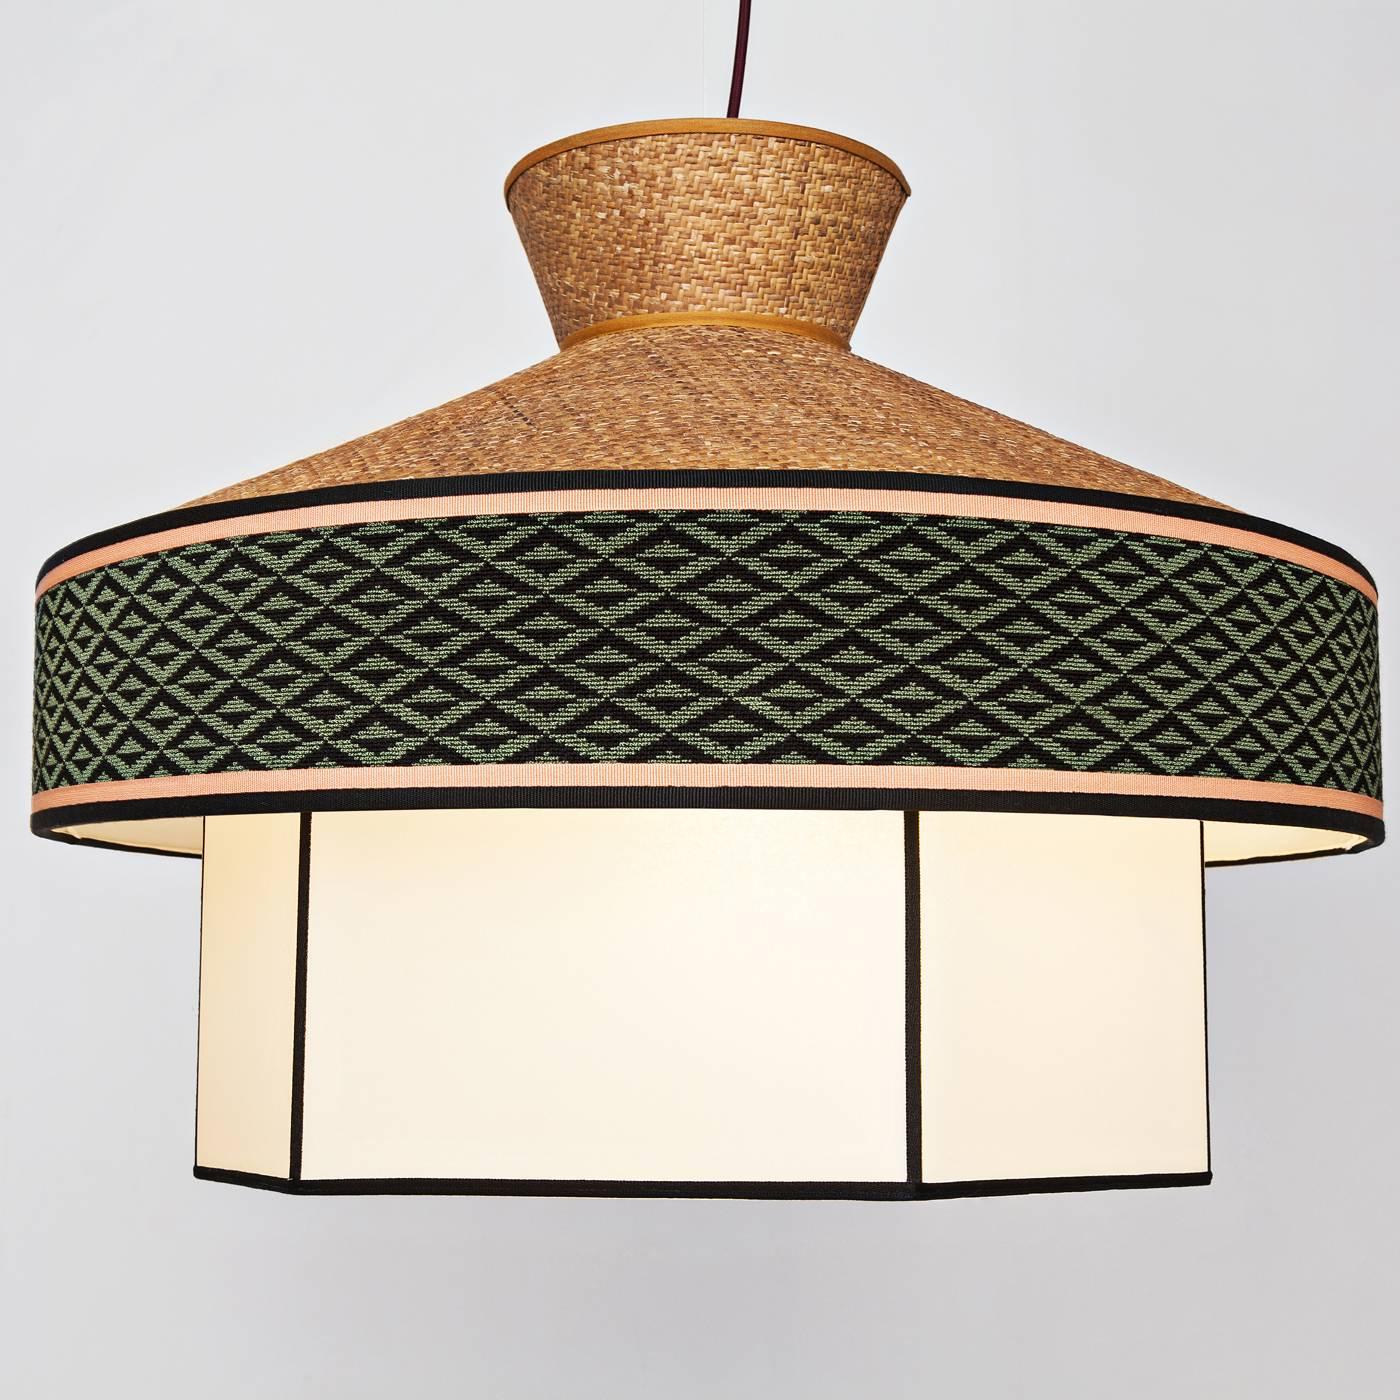 This chandelier is part of a limited series of 12 pieces designed keeping the eclectic style of the Milanese restaurants of the 1950s in mind. In this piece, a structure in rattan comes together with fabric decorated with geometric patterns, to